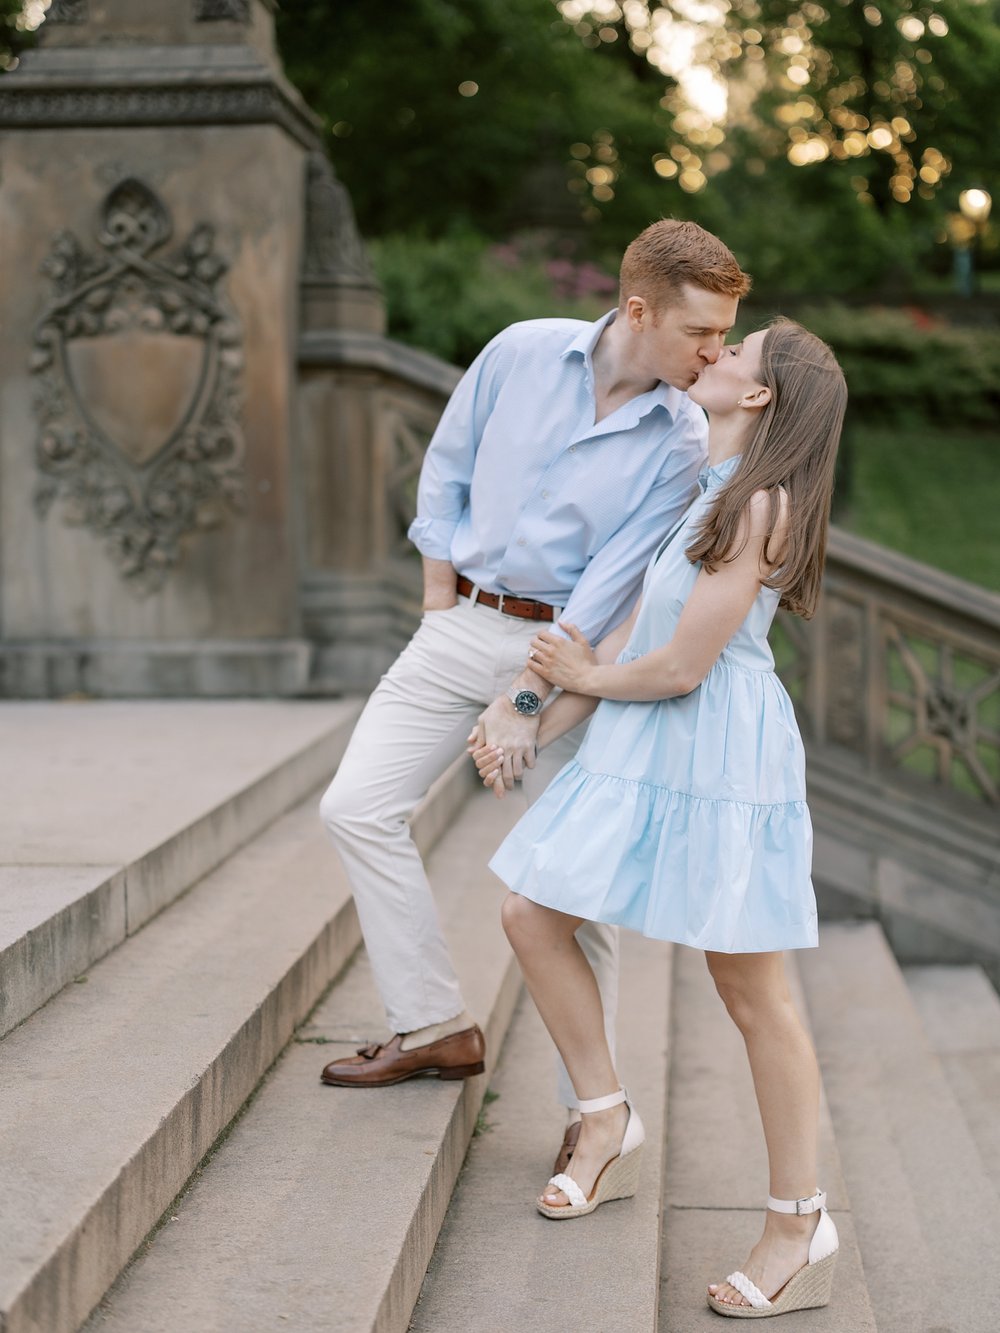 man leans down step to kiss woman standing on staircase inside Central Park